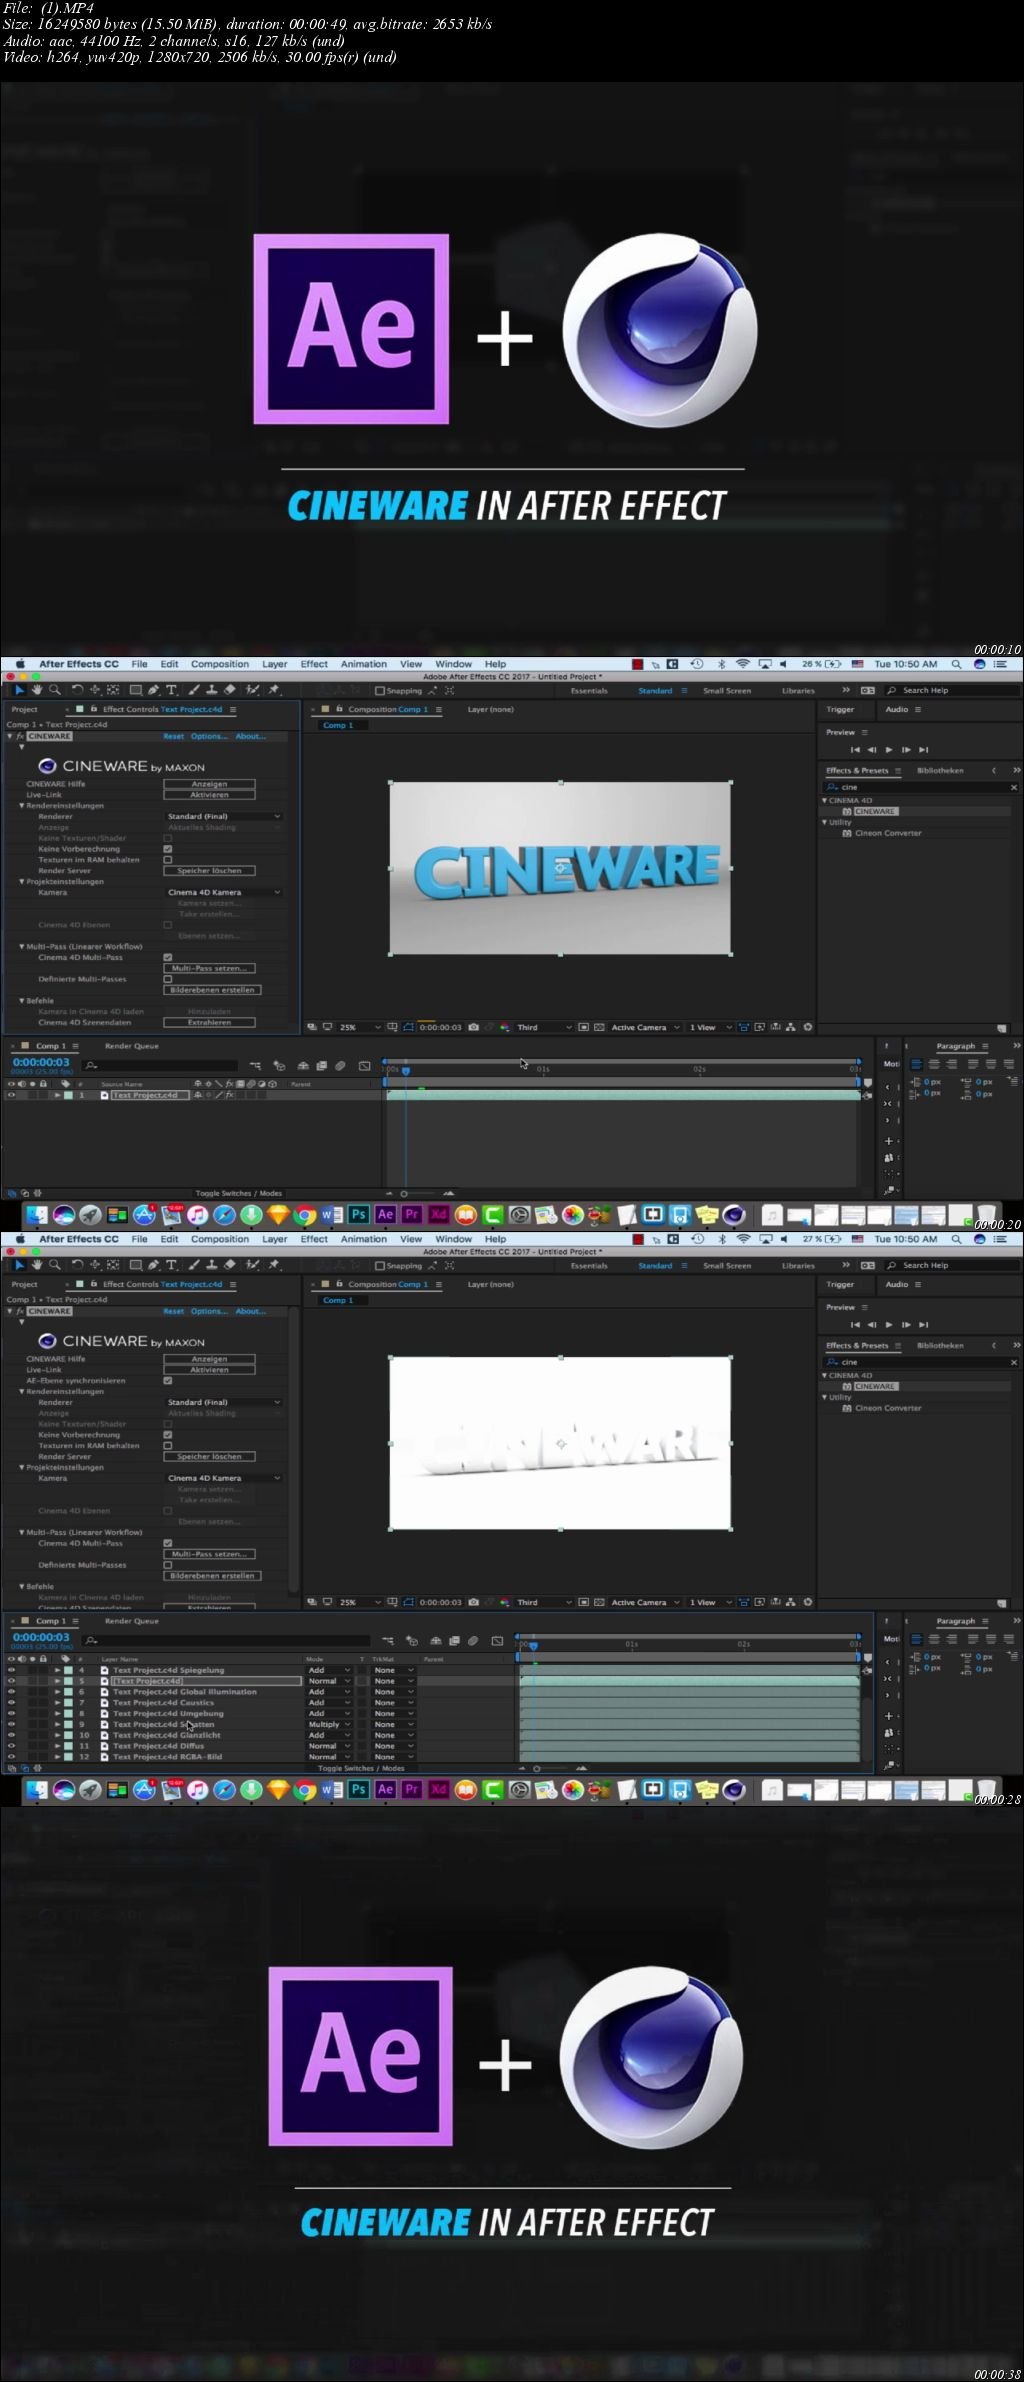 Cineware plugin for after effects free download illustrator 12 free download